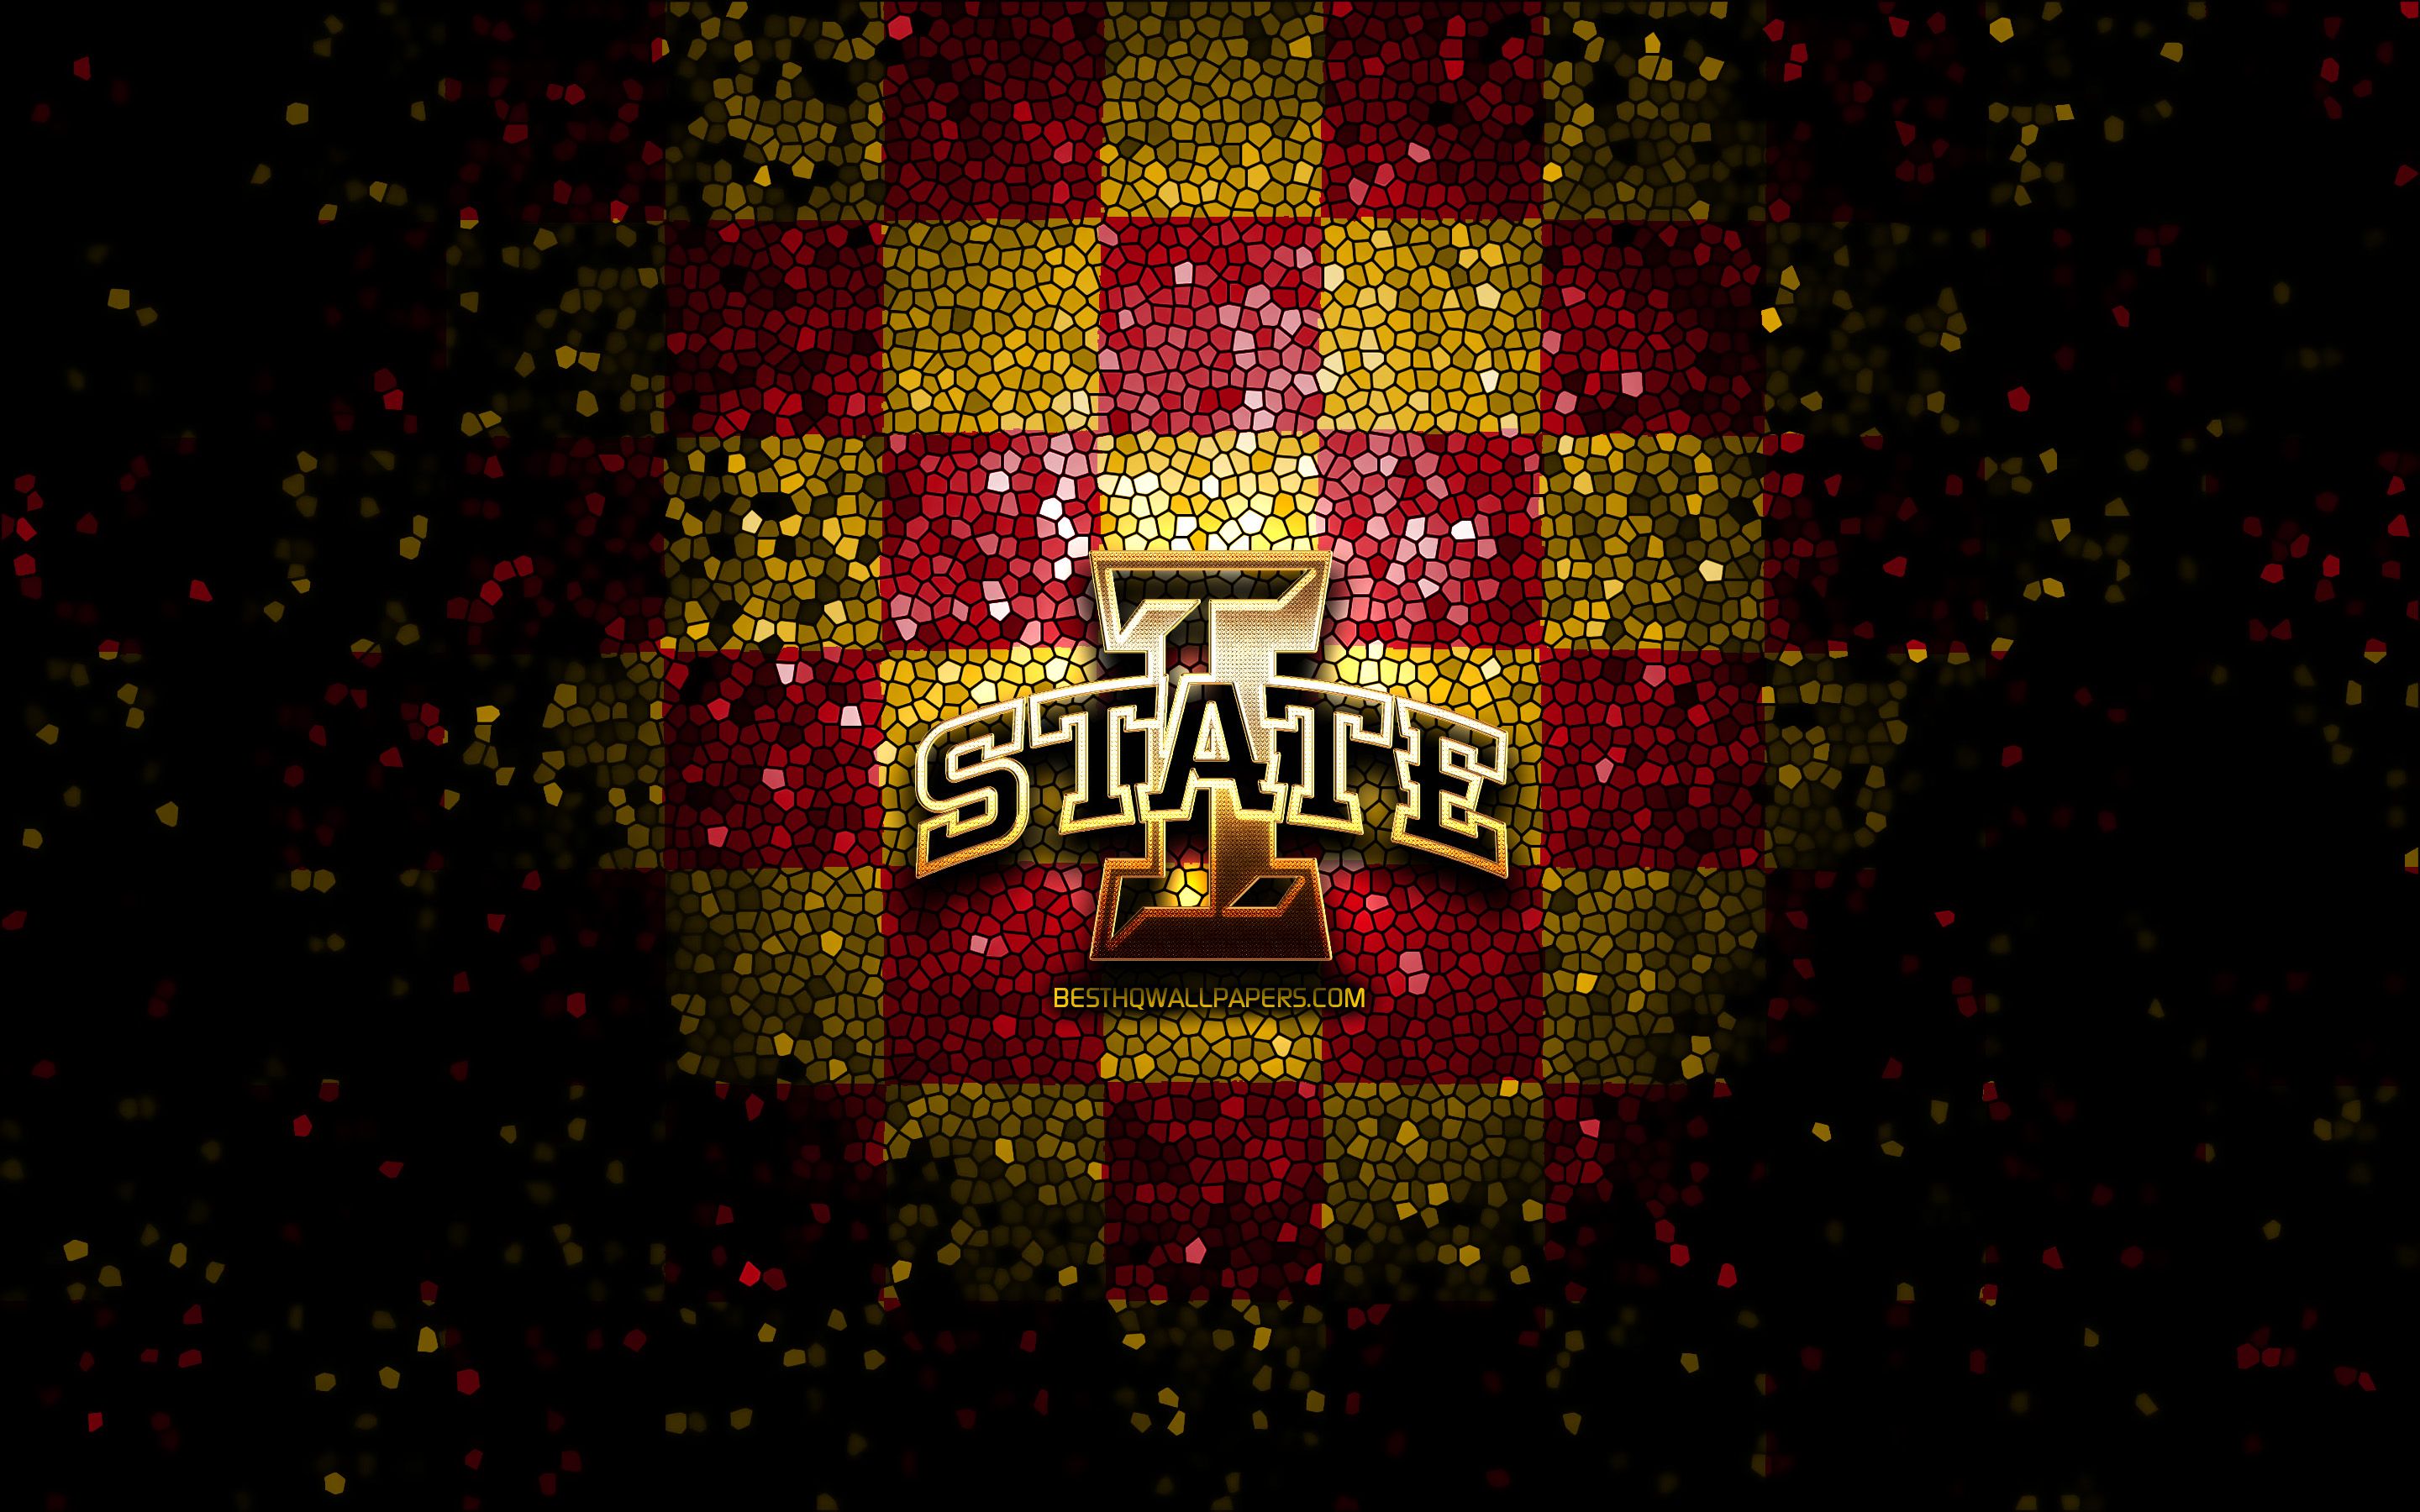 Download wallpaper Iowa State Cyclones, glitter logo, NCAA, red yellow checkered background, USA, american football team, Iowa State Cyclones logo, mosaic art, american football, America for desktop with resolution 2880x1800. High Quality